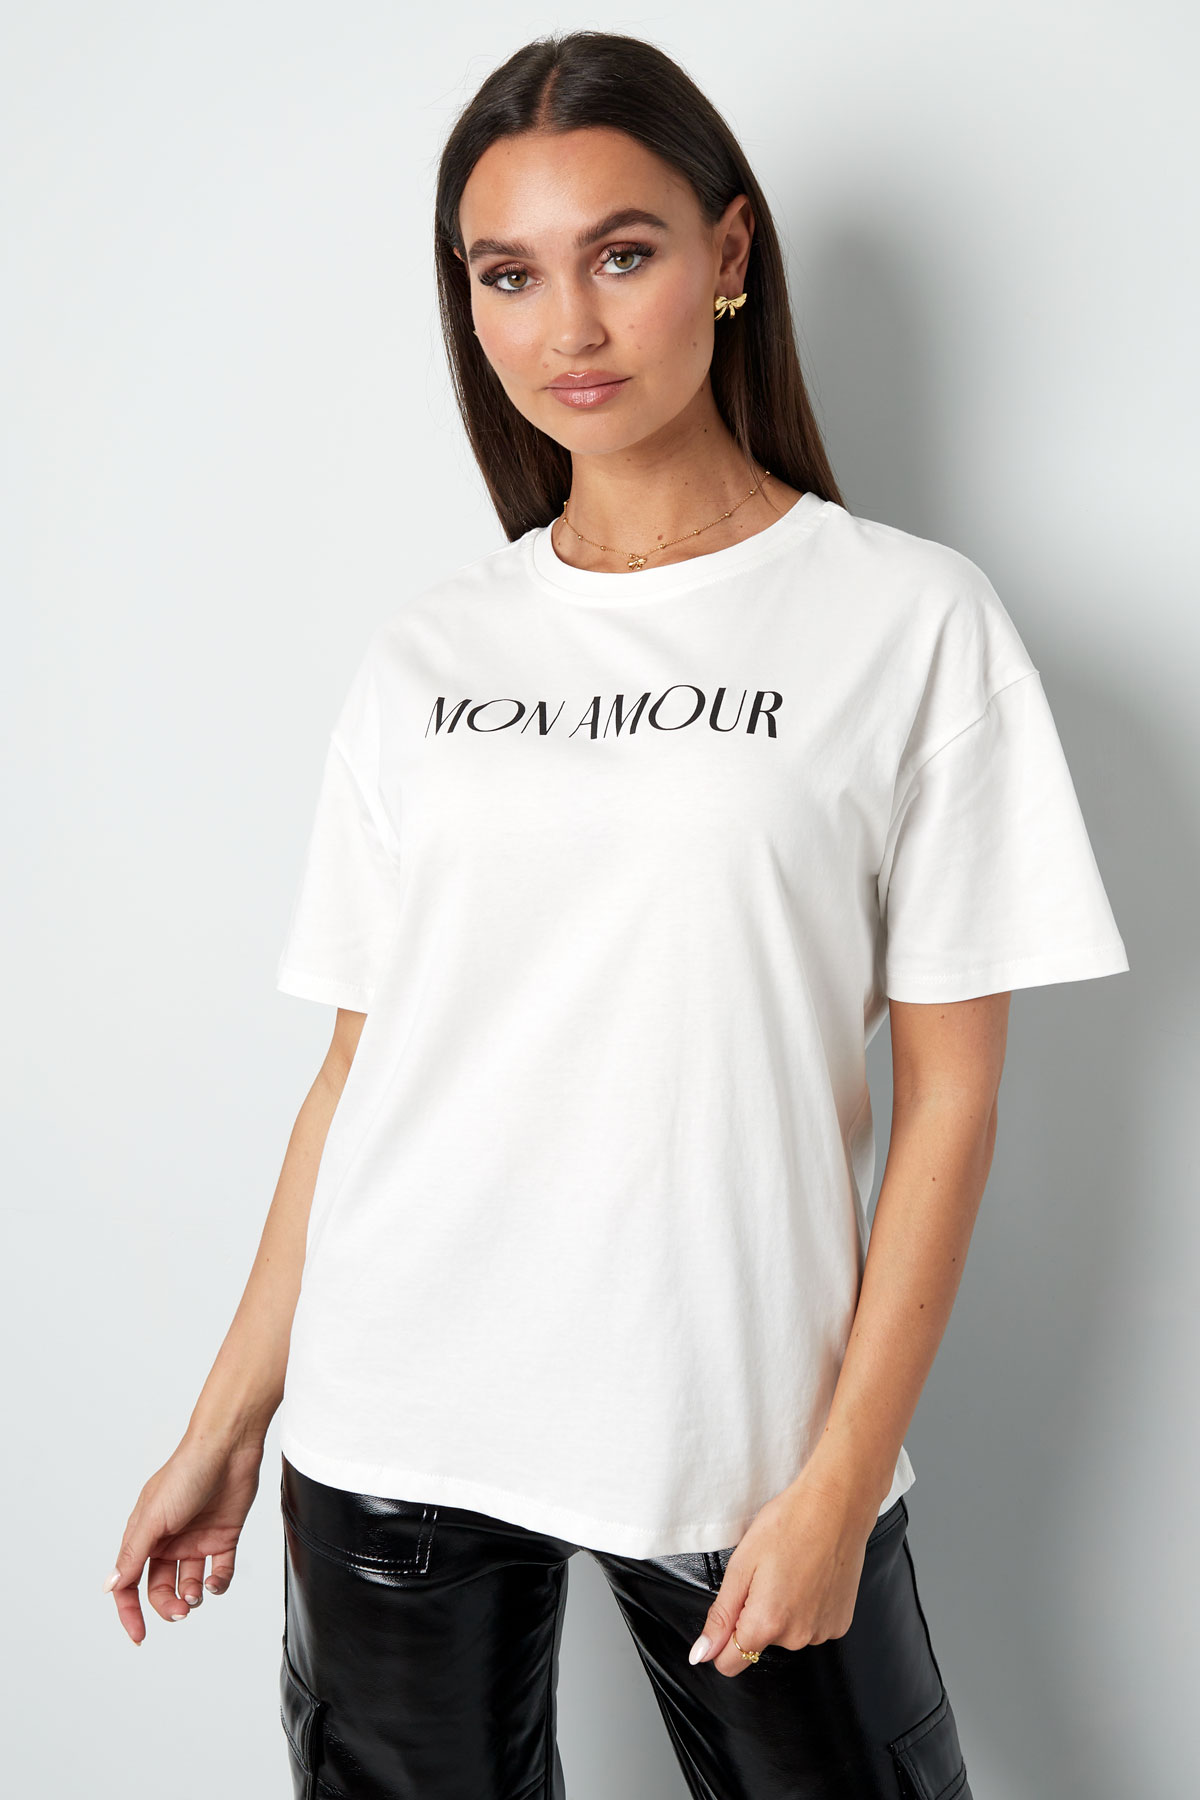 T-shirt mon amour - black and white Picture2